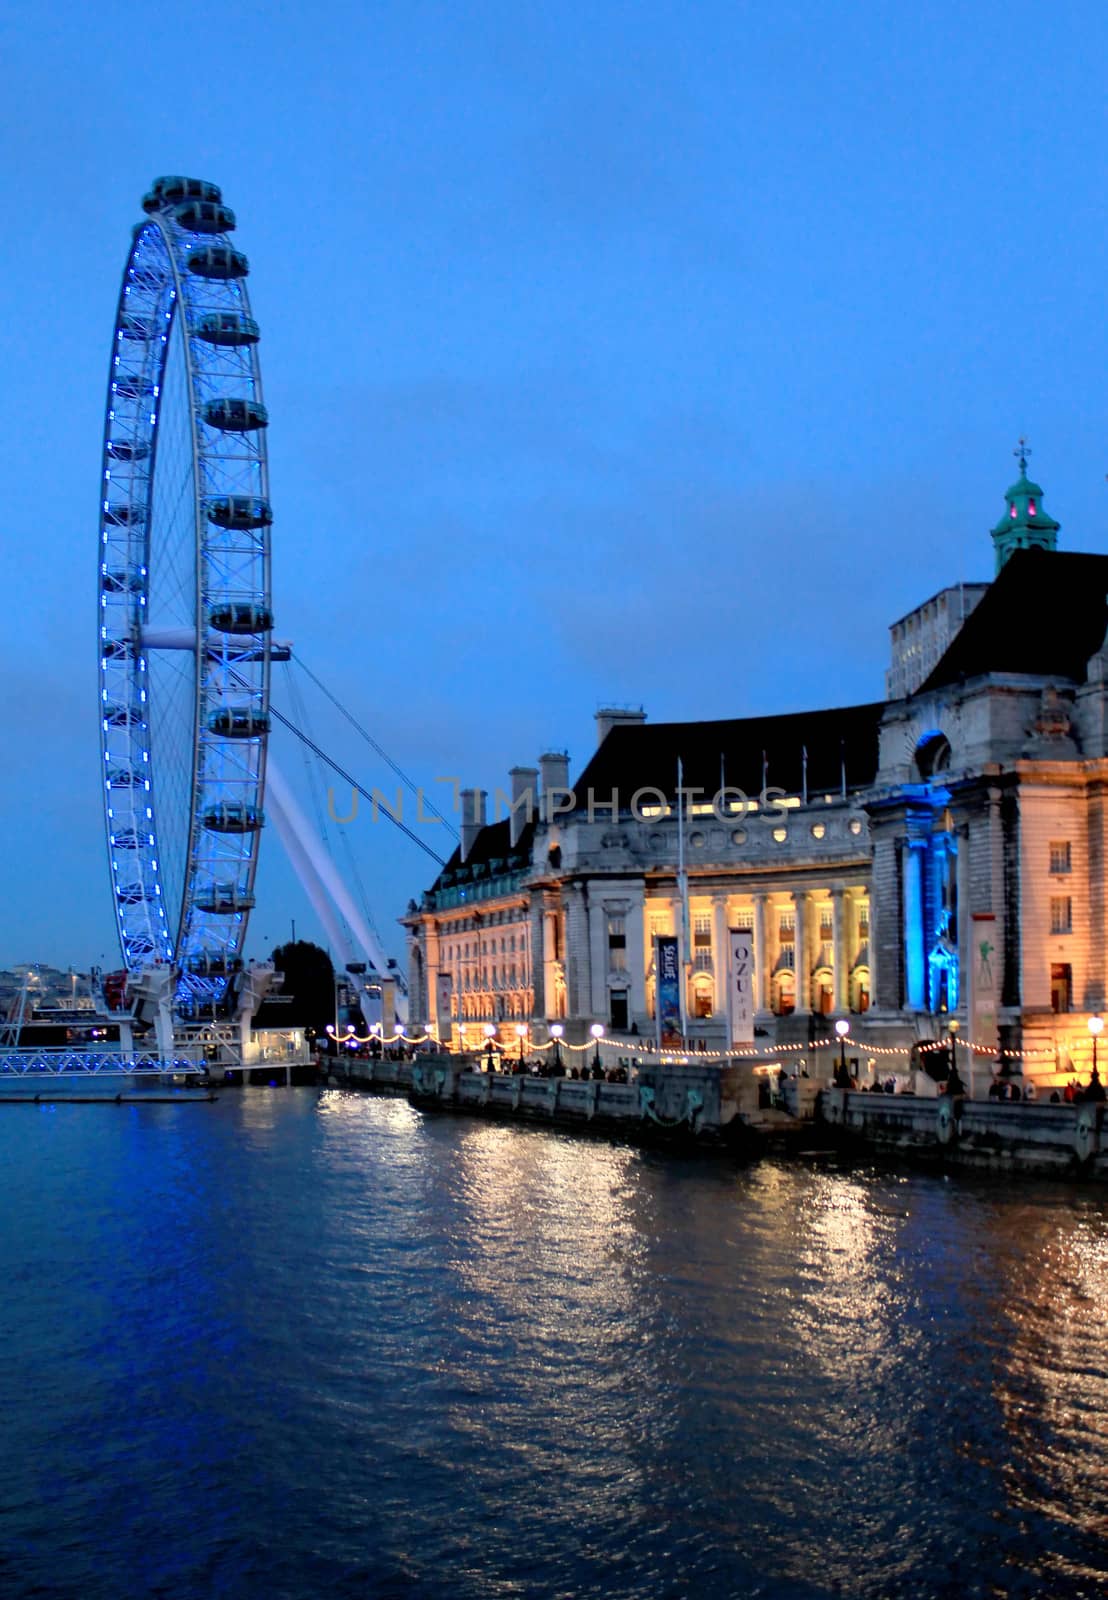 London eye, famous Britain capital attraction  by ptxgarfield